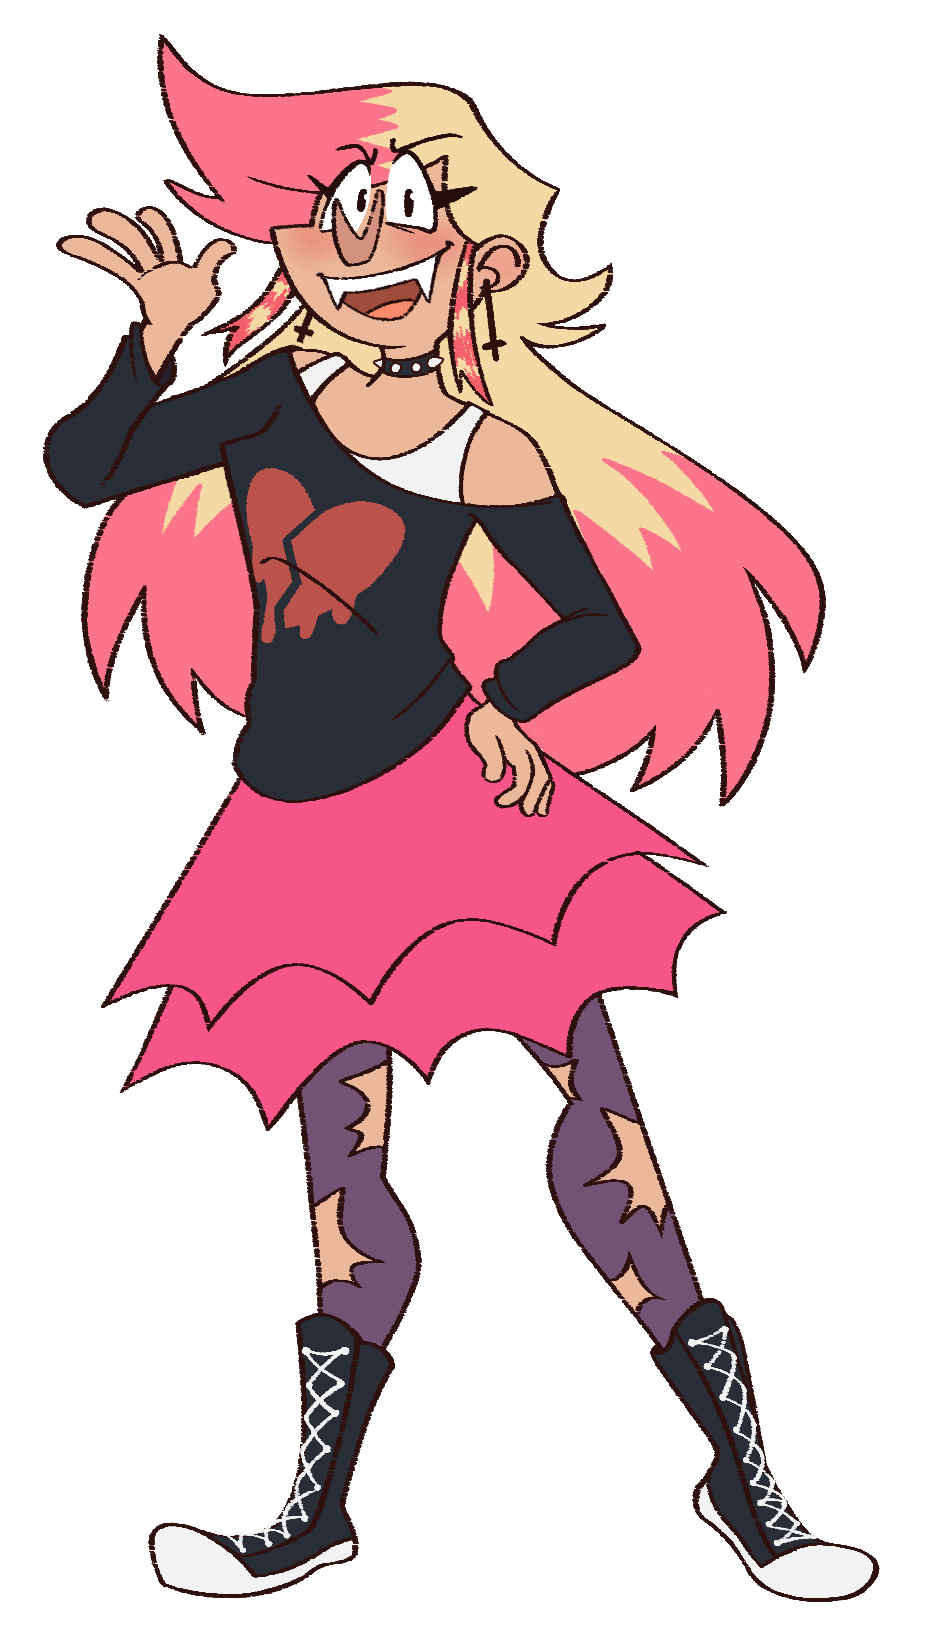 A fullbody drawing of Lila; she has blonde hair with pink tips. She wears a black sweater with a broken, bleeding heart logo, a pink skirt, purple ripped tights, and converse. She is smiling and has vampire fangs.